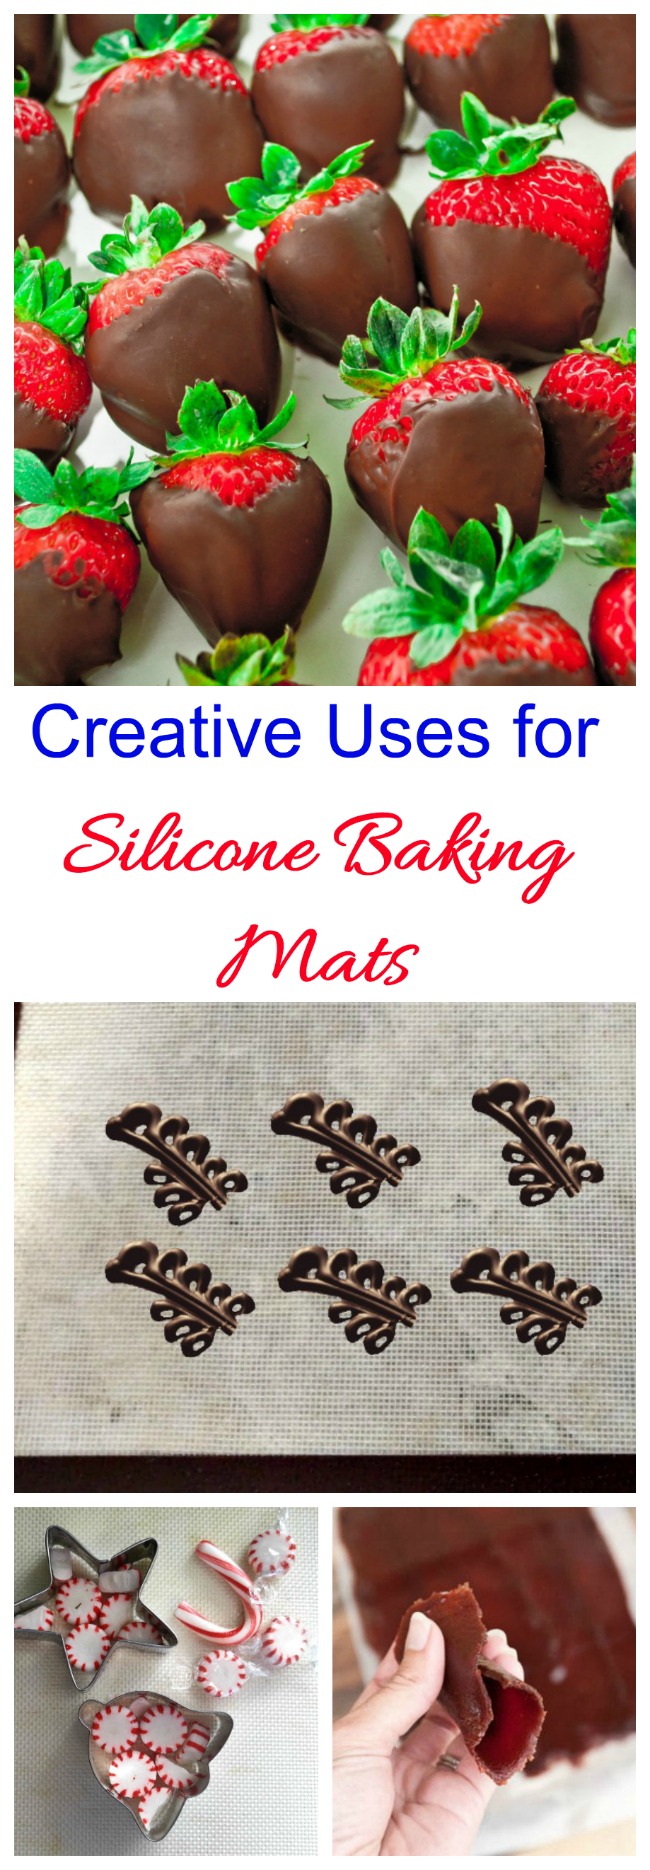 A Silicone baking mat can be used for much more than just baking cookies. Check out these 15 creative ways to use Silpat mats.